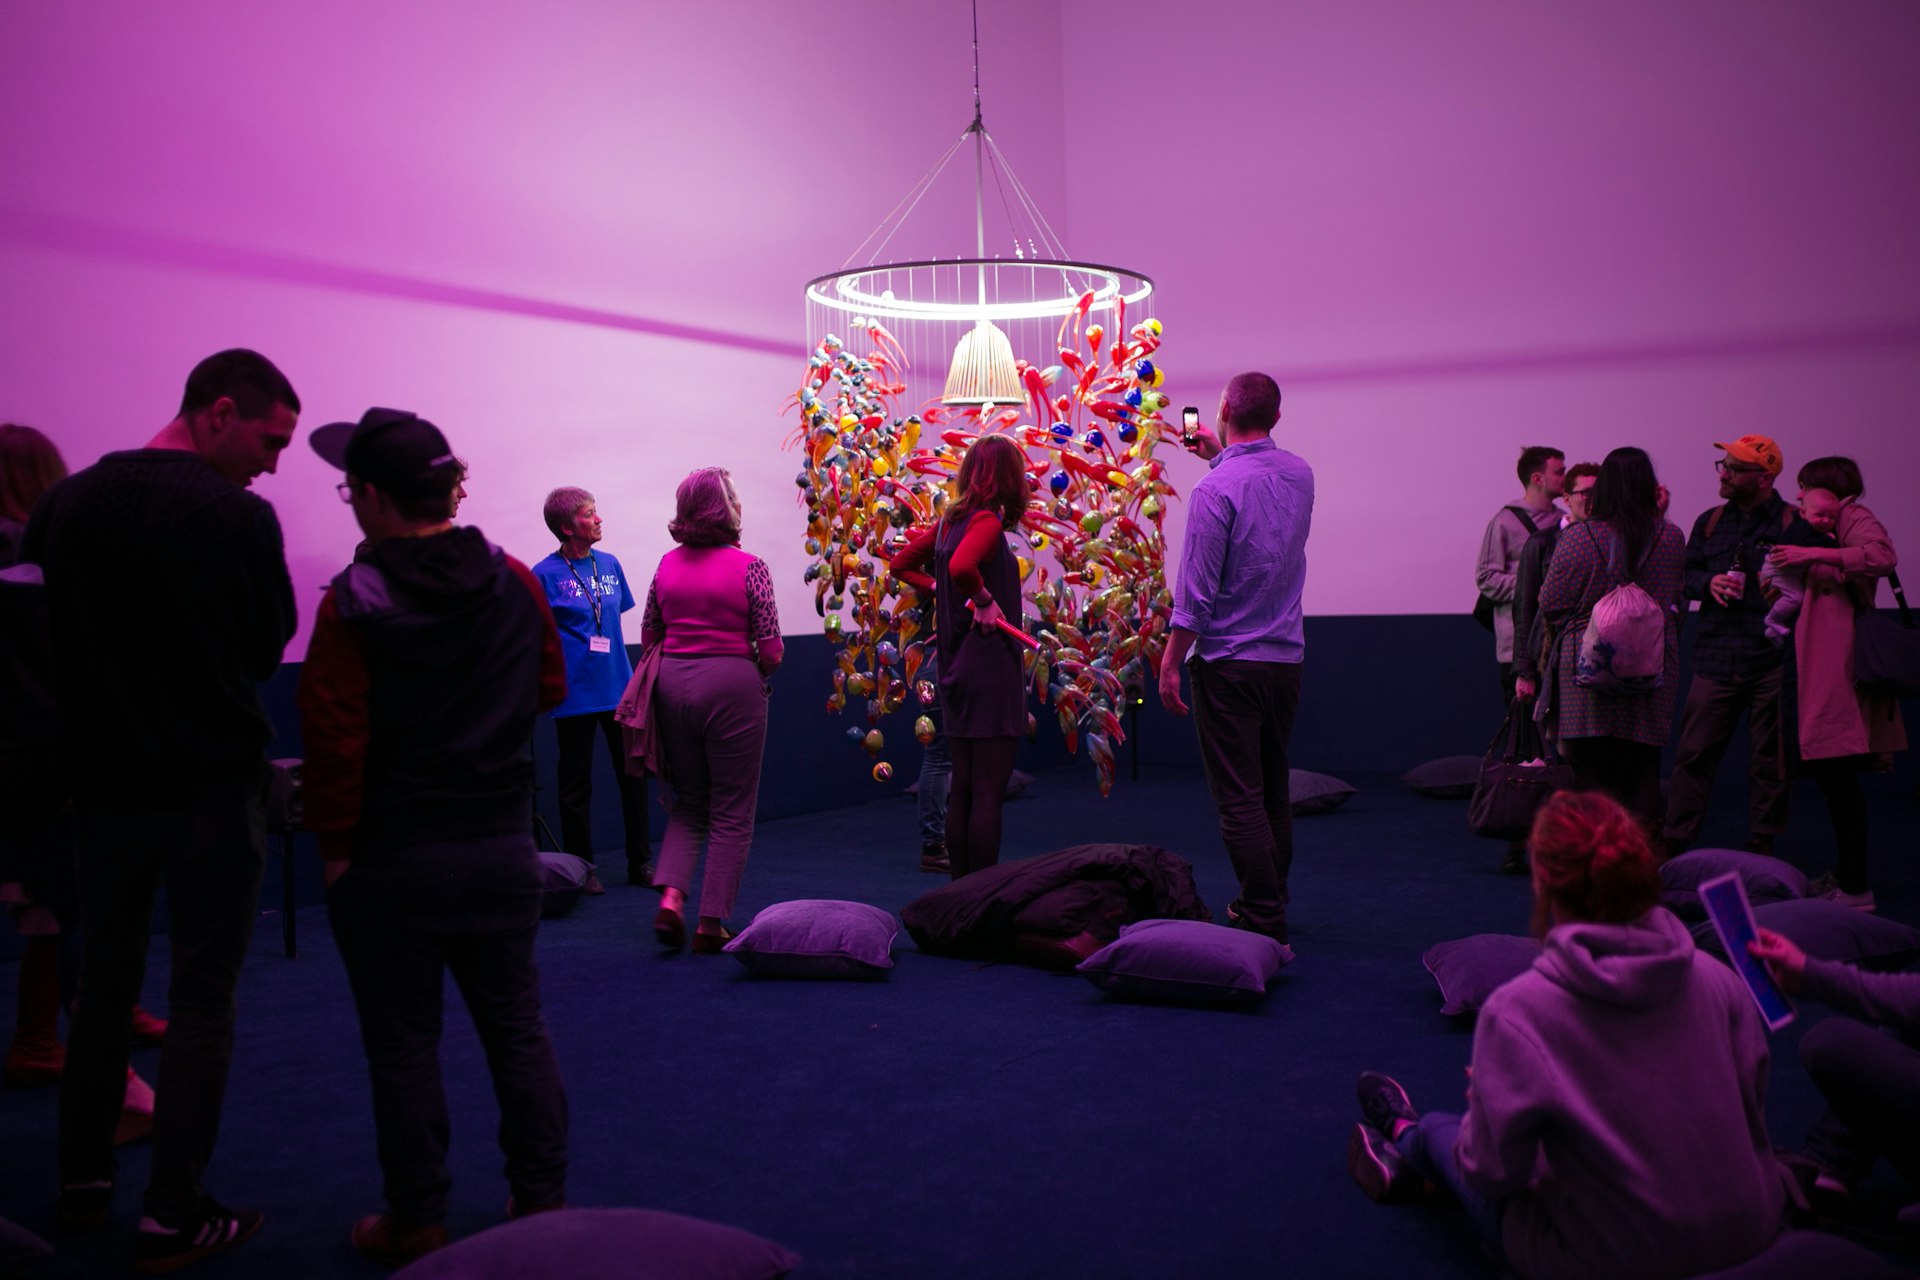 A room of people viewing an art piece that looks like a low chandelier of colored glass